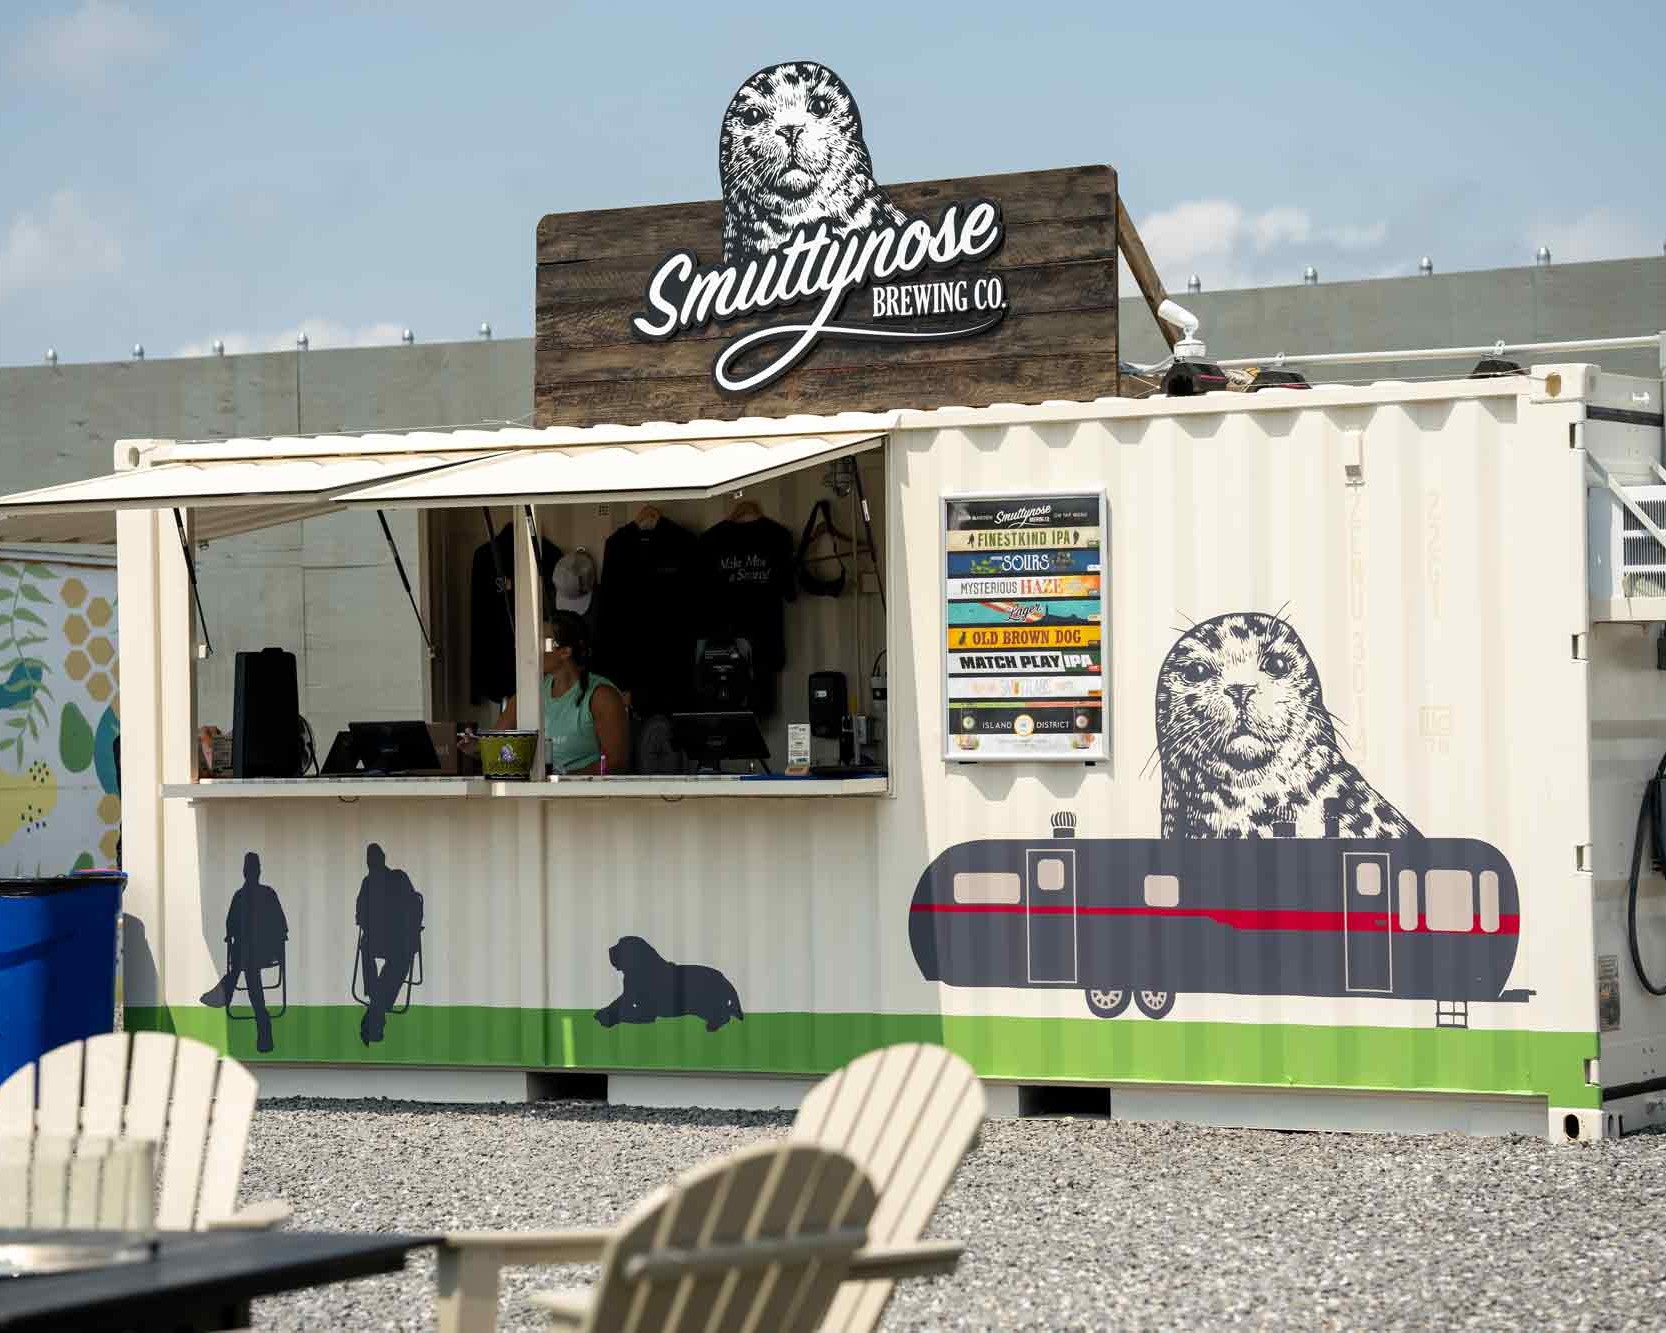 ROXBOX Containers Shipping Container Bar at Smuttynose Brewing Company Beer Garden at Tuscan Village